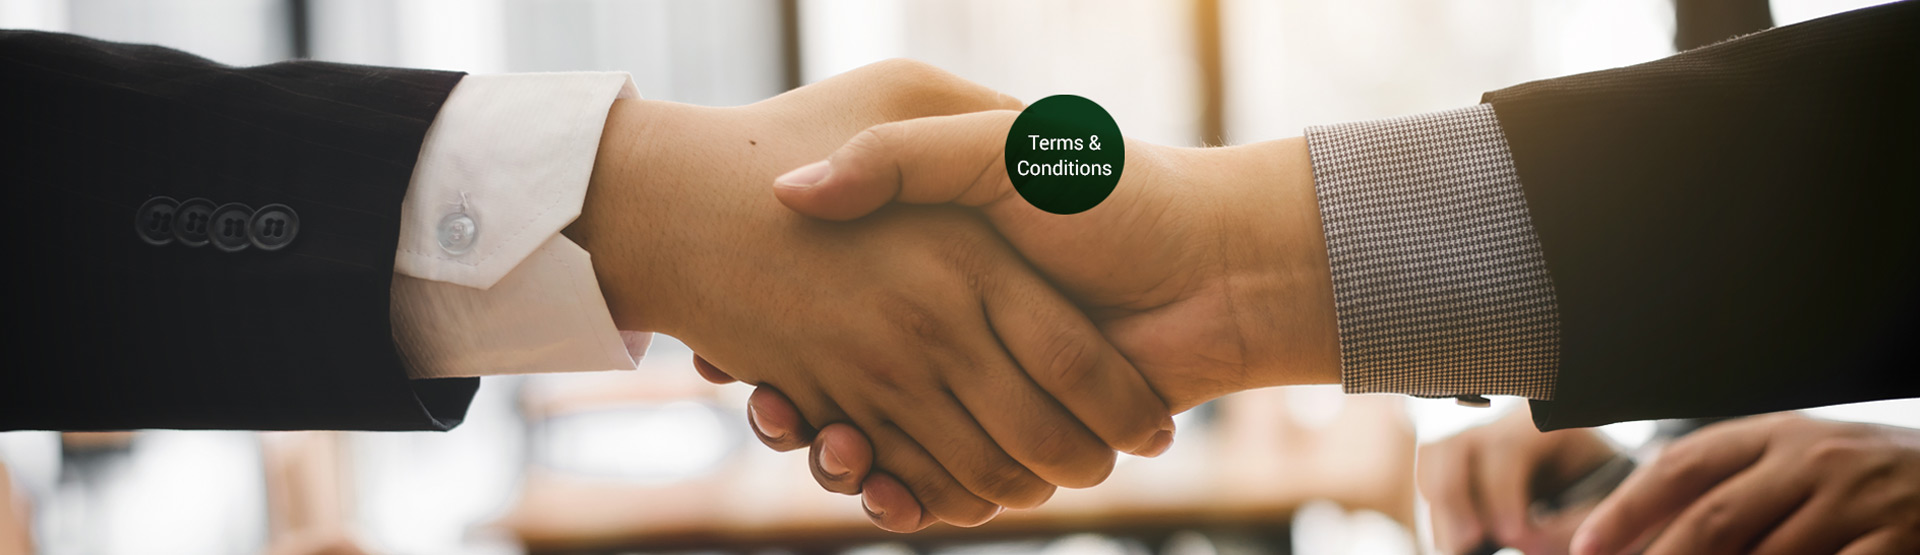 terms-conditions-banner